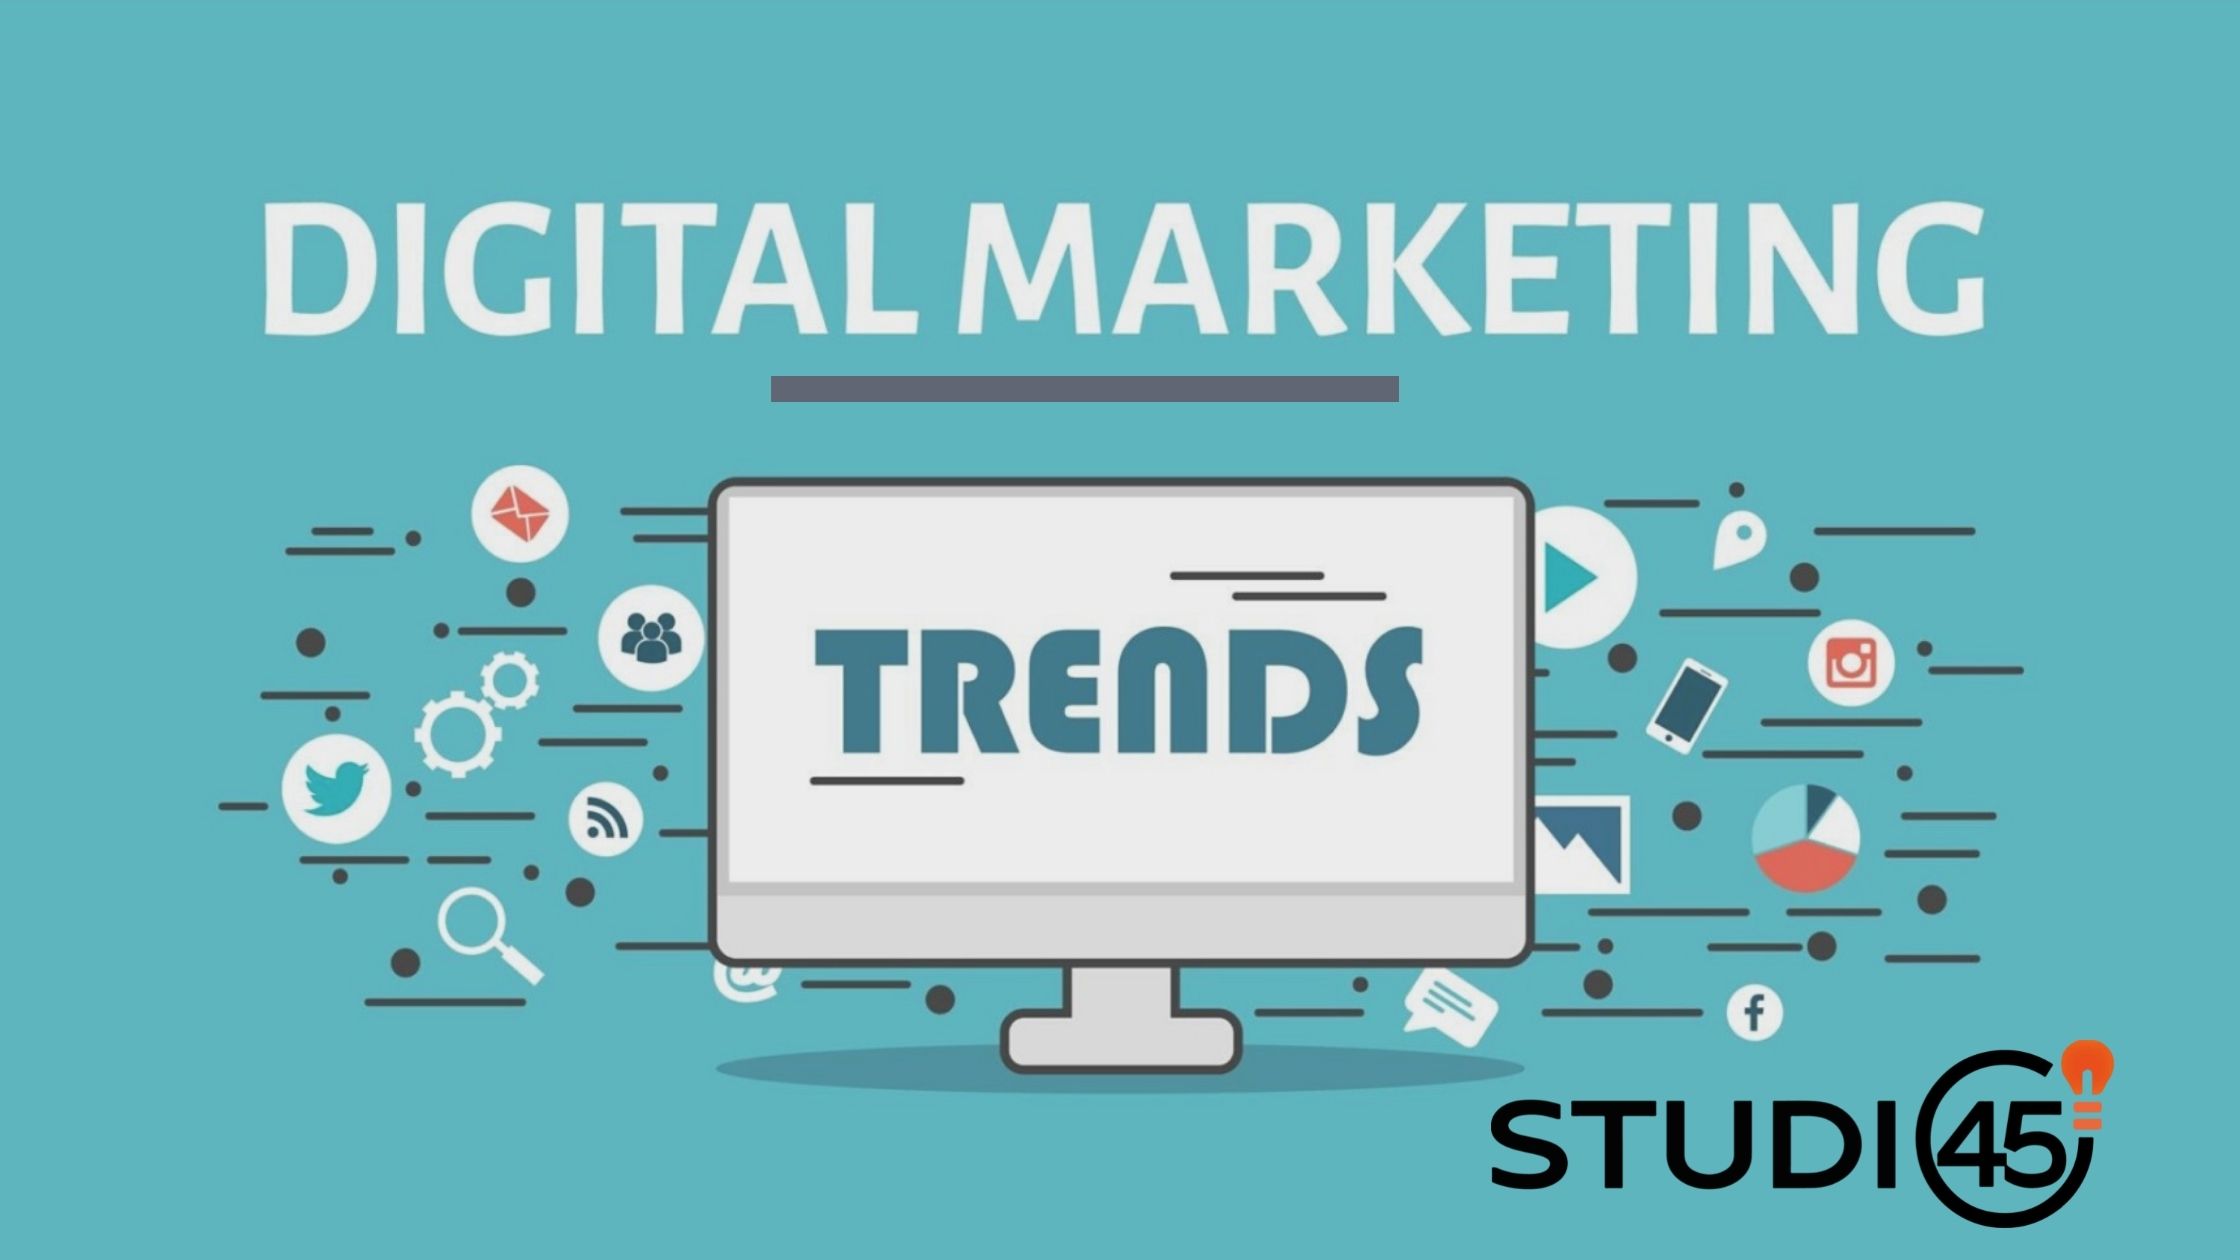 Digital Marketing Trends: Effective or Just A Buzz?